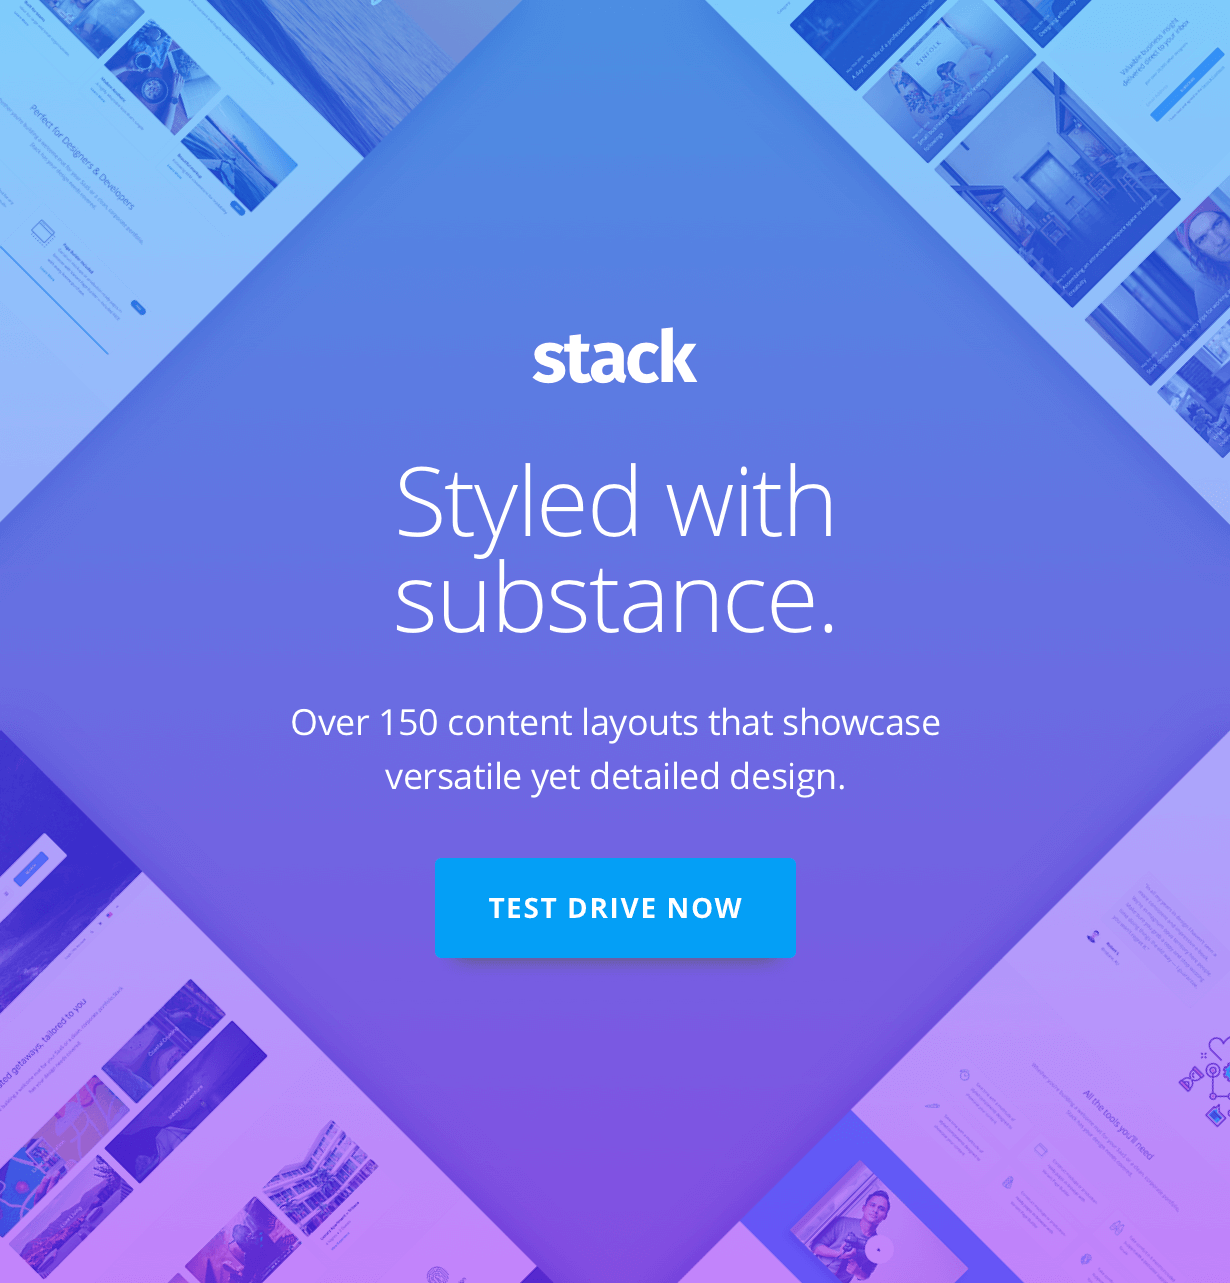 promo1 - Stack - Multi-Purpose WordPress Theme with Variant Page Builder & Visual Composer